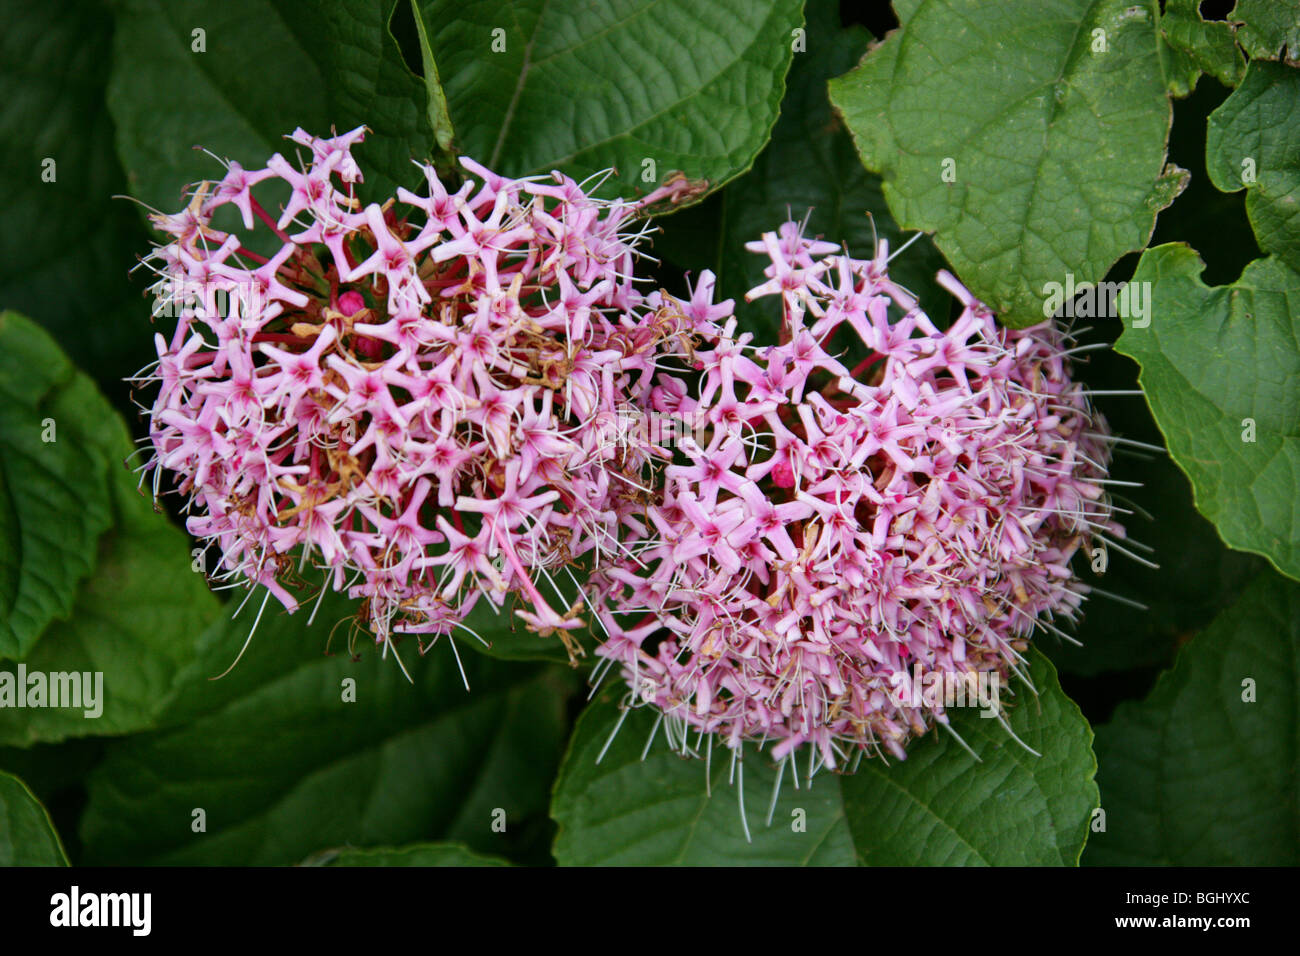 Strong-Scented Glorybower, Cashmere Bouquet, Rose Glory Bower, or Mexican Hydrangea, Clerodendrum bungei, Lamiaceae. China Stock Photo